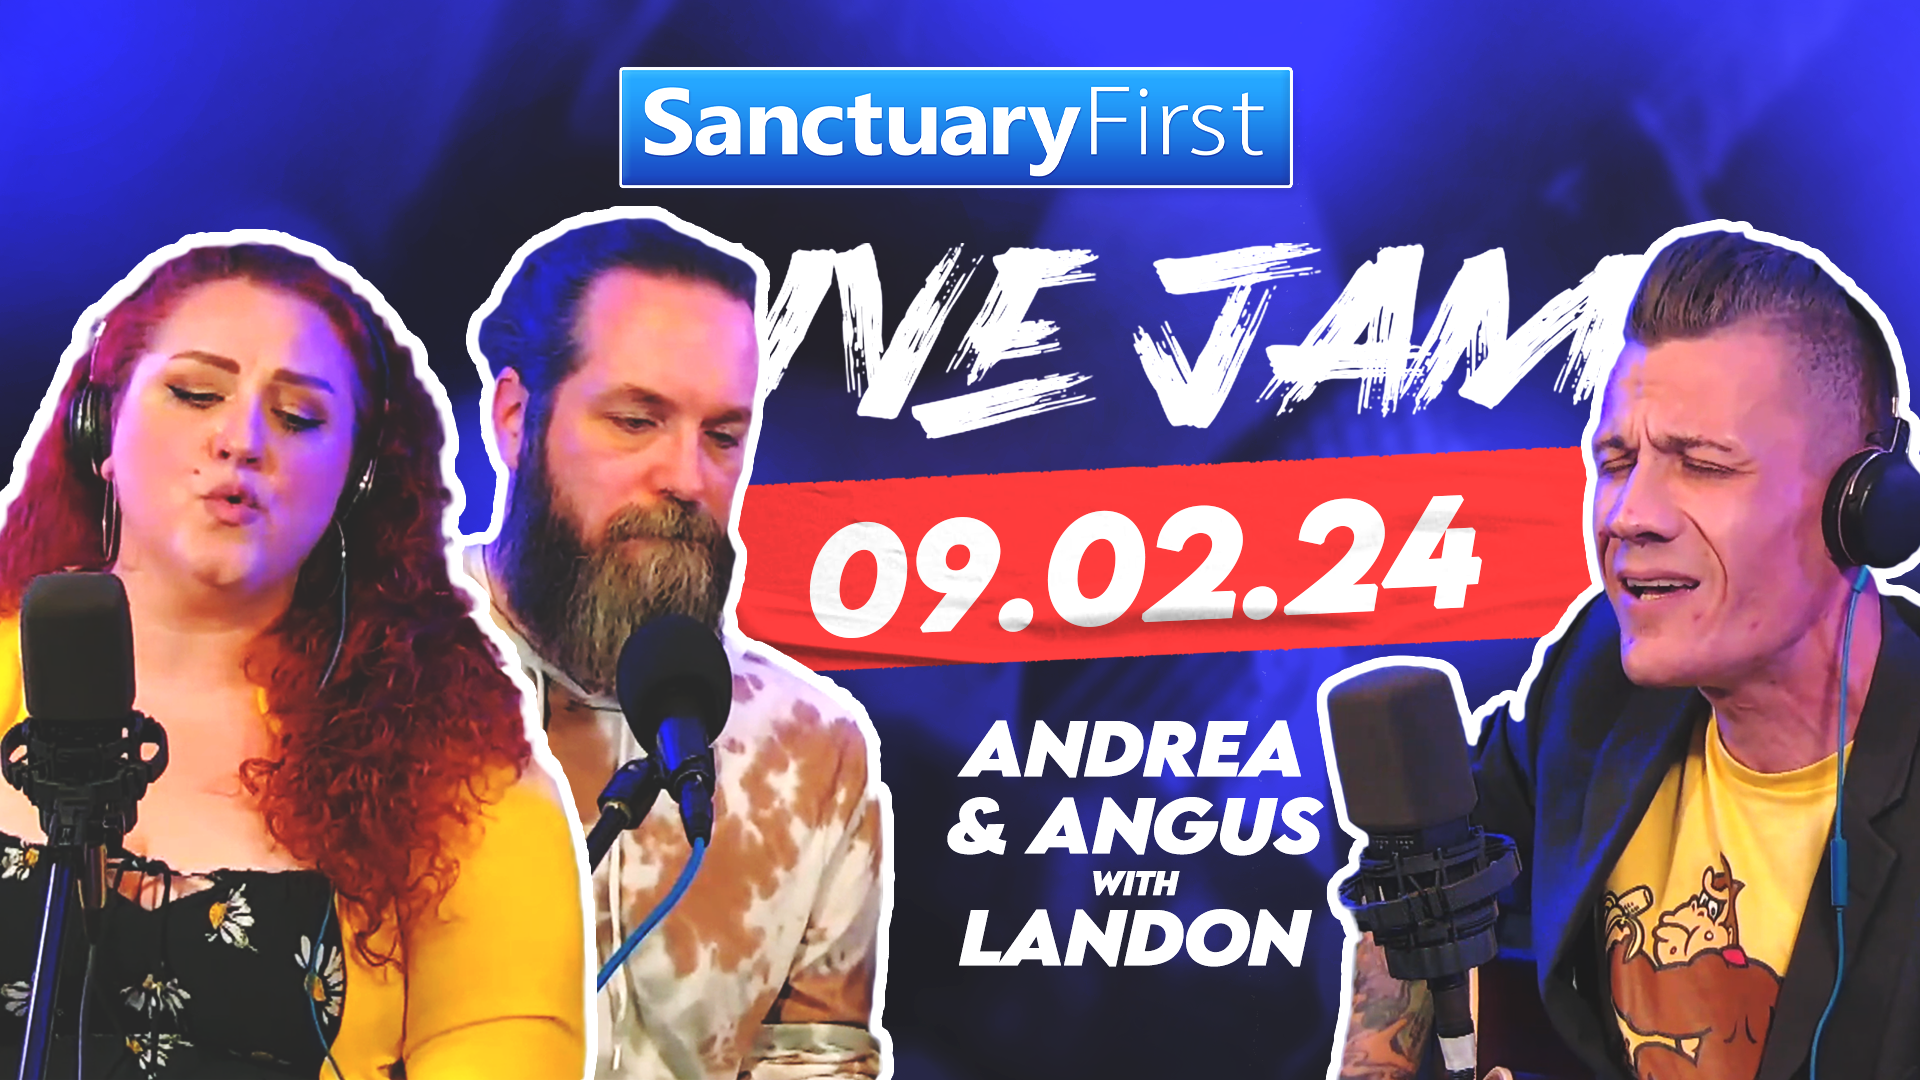 Live Jam Friday - Andrea & Angus with Landon